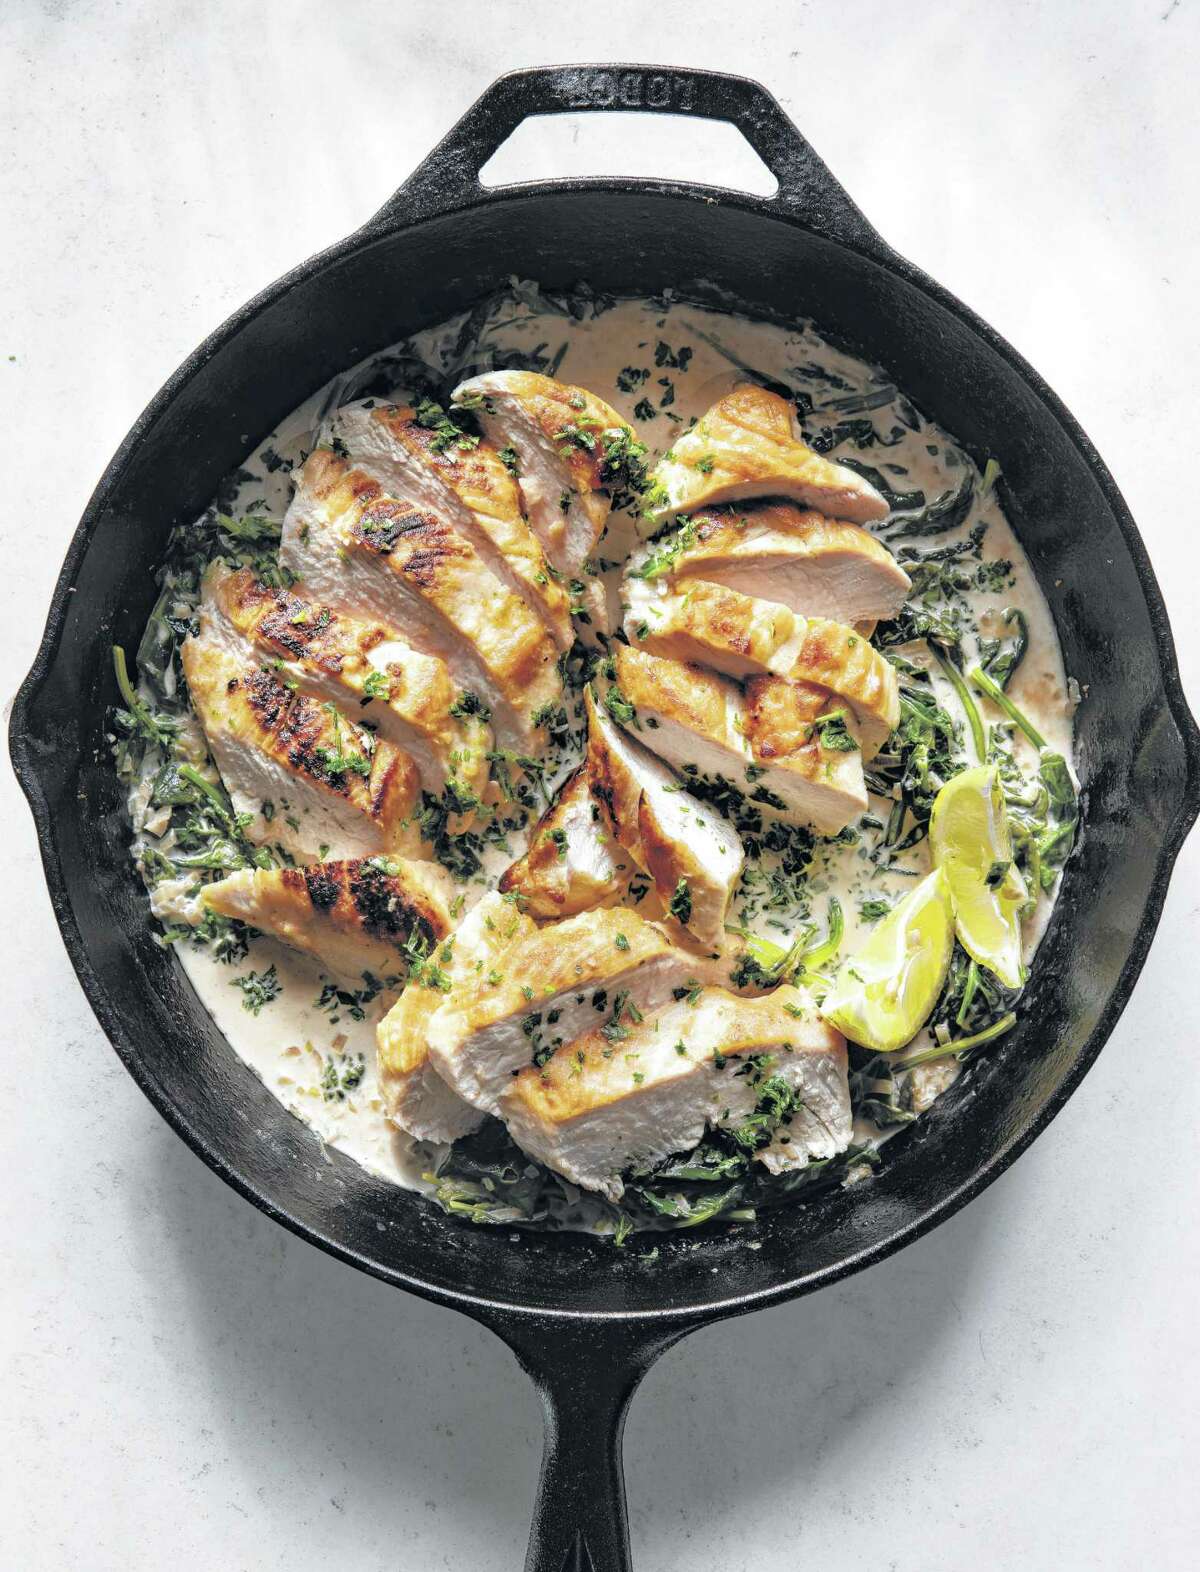 Chicken Florentine is a recipe from "Magnolia Table: Volume 2" by Joanna Gaines.